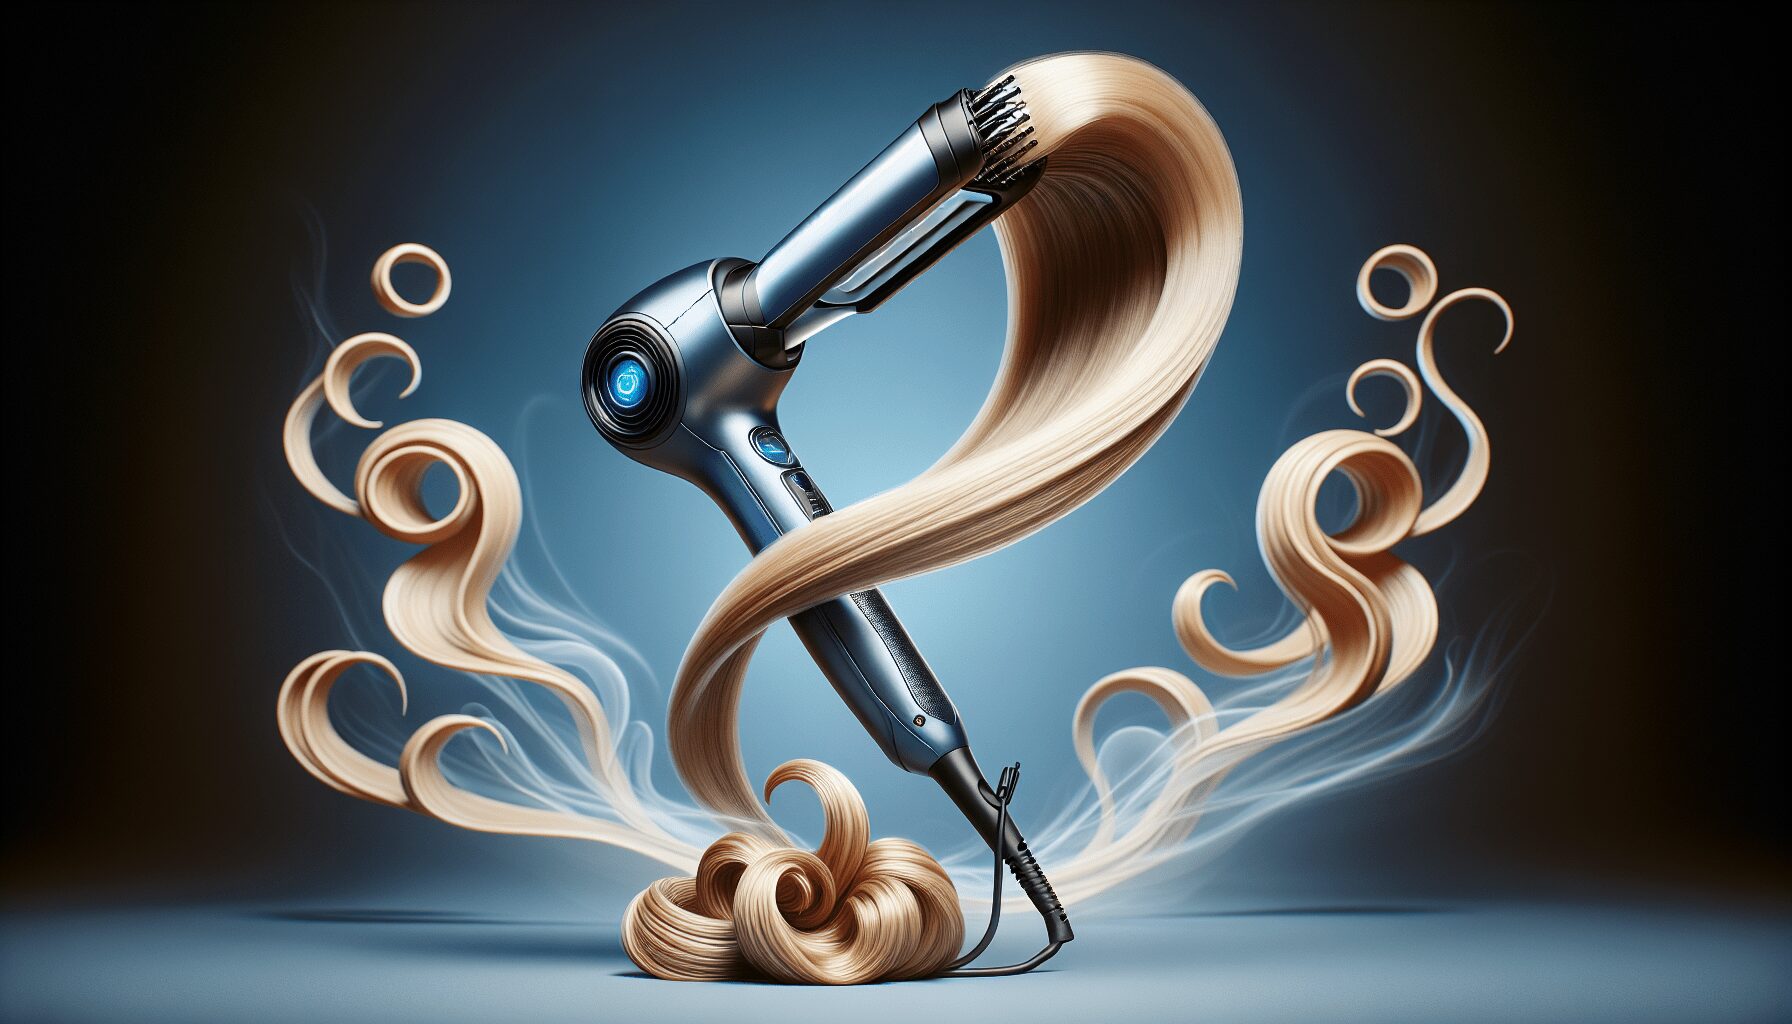 Why Is The Dyson Airwrap Better Than A Curling Iron?